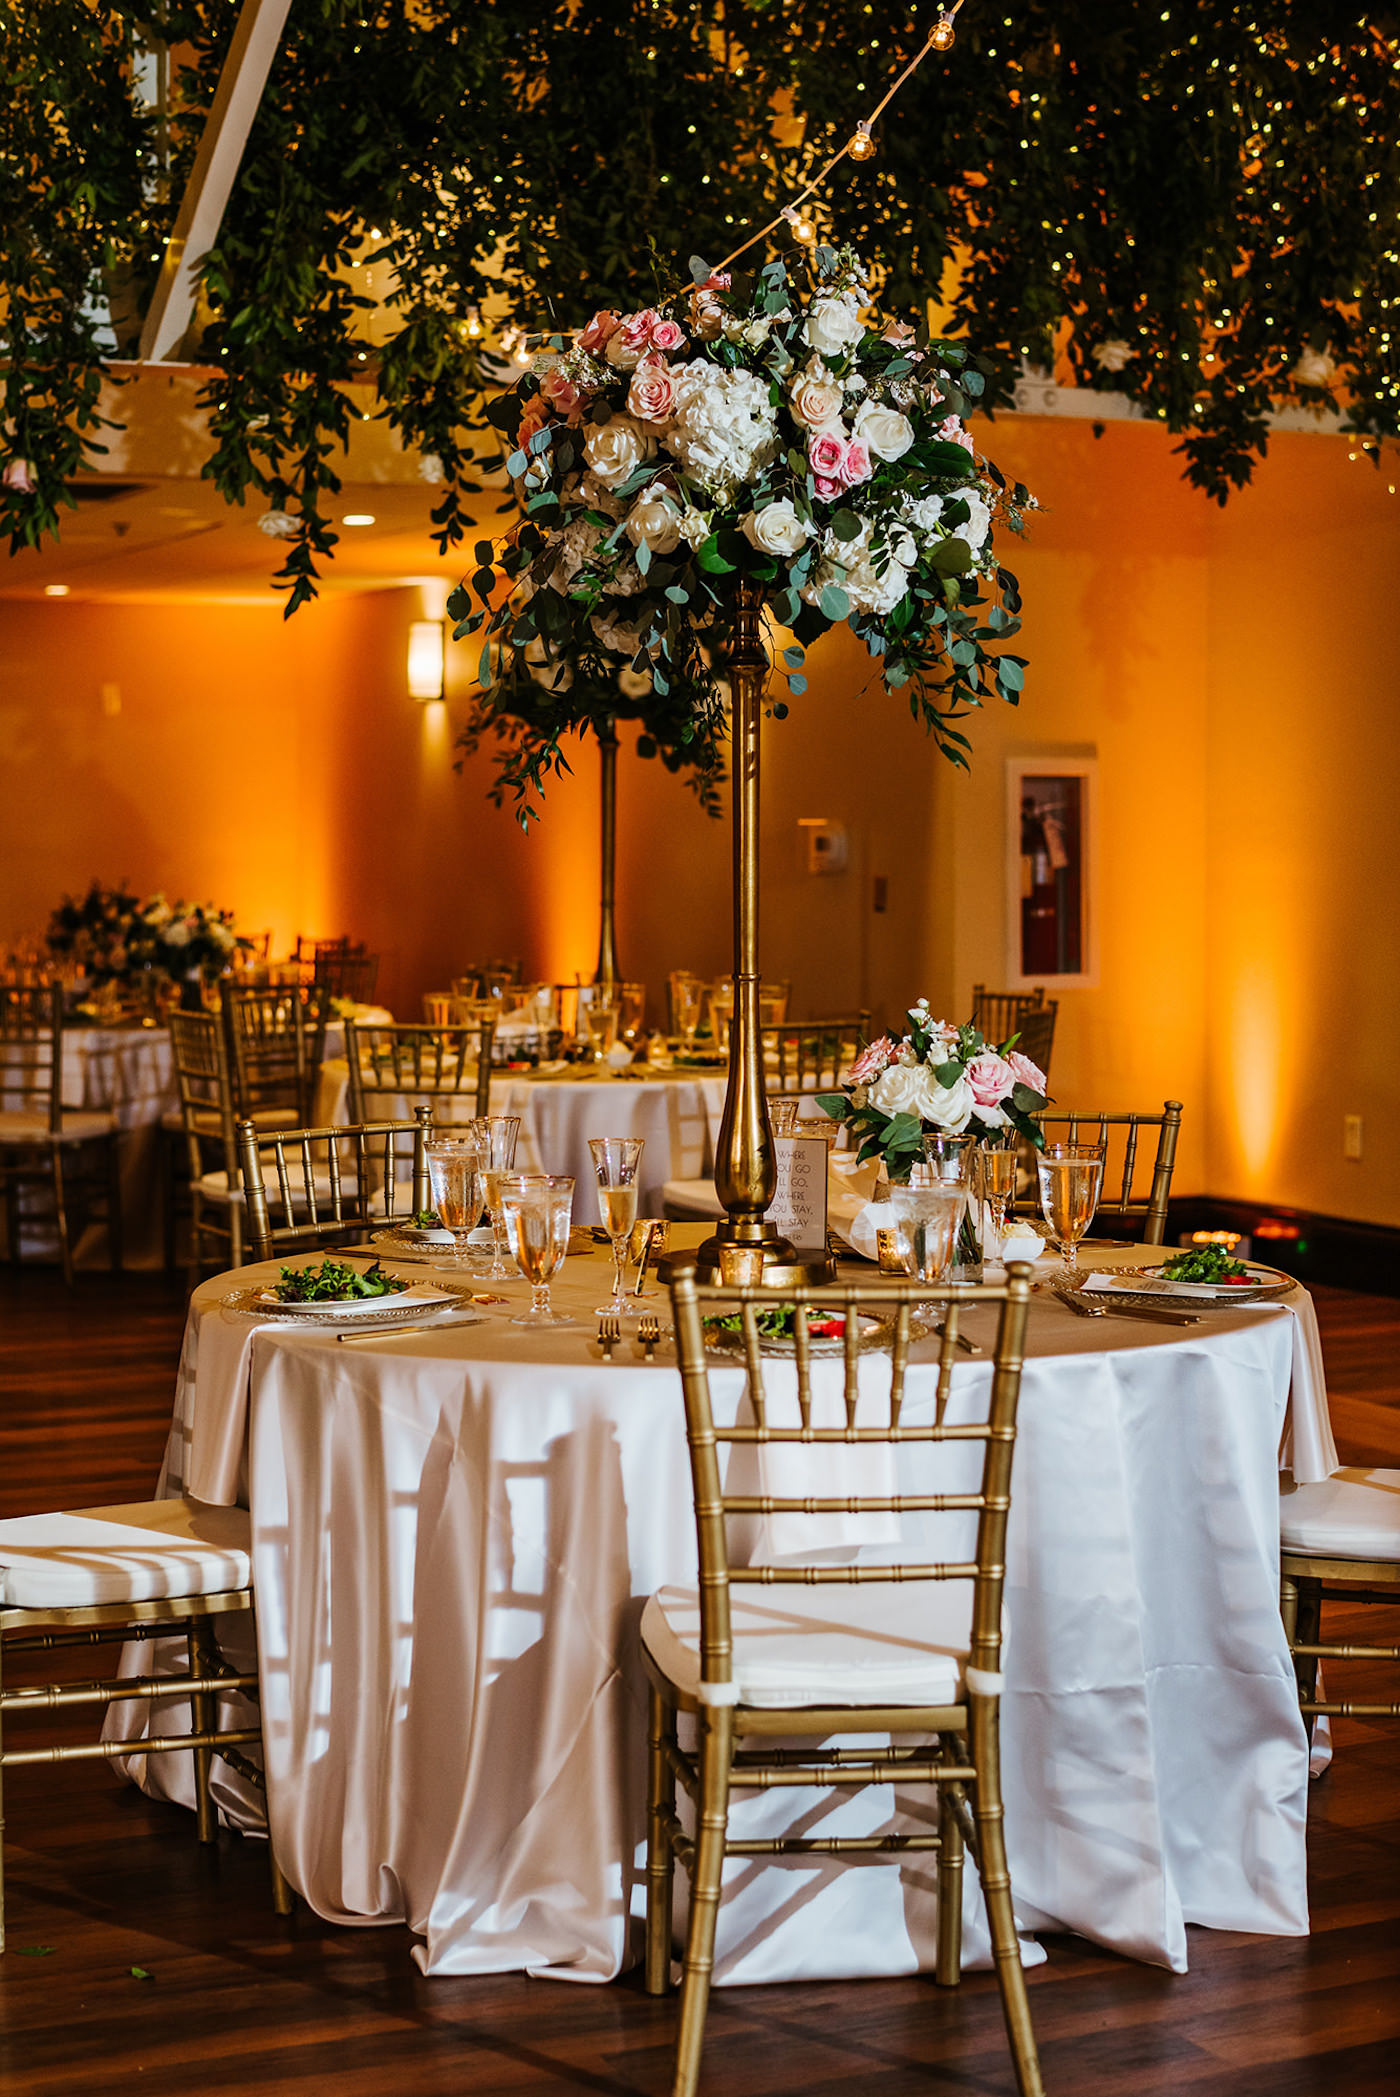 Tall Wedding Centerpiece with White Hydrangea and Blush Pink Roses and Eucalyptus Greenery on top of Gold Candlestick | St. Pete Garden Wedding Indoor Reception with Amber Gold Uplighting and Wedding Ceiling Floral Installment with Greenery and Blush Pink and White Roses and Canopy String Lights | Reception Table with White Linens and Gold Chiavari Chairs | Monarch Events and Design | A Chair Affair